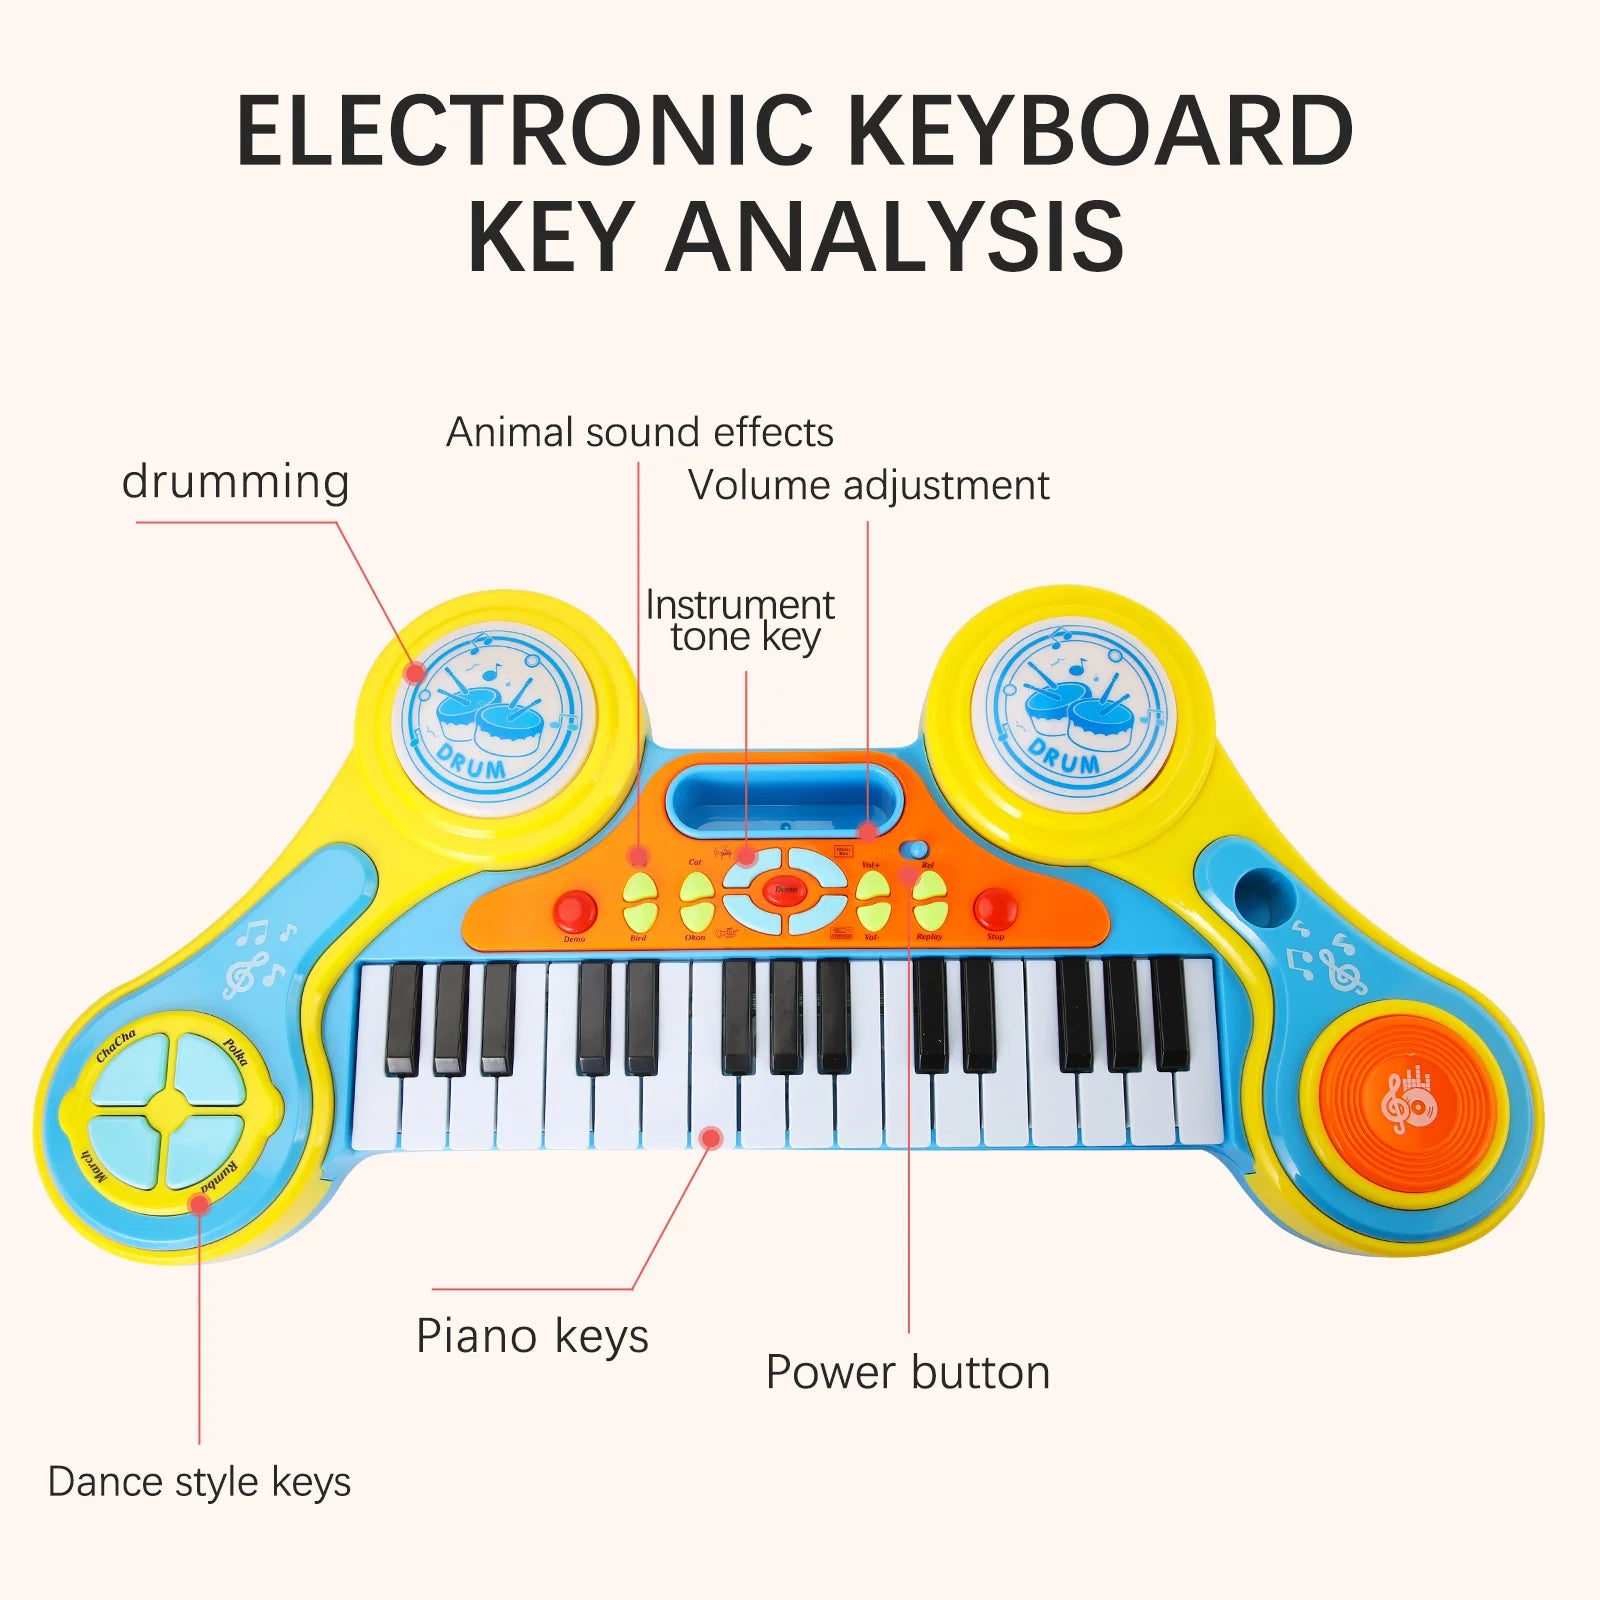 Close-up of a colorful electronic keyboard piano toy with labeled functions like drumming, animal sound effects, and dance style keys, promoting engaging musical learning.